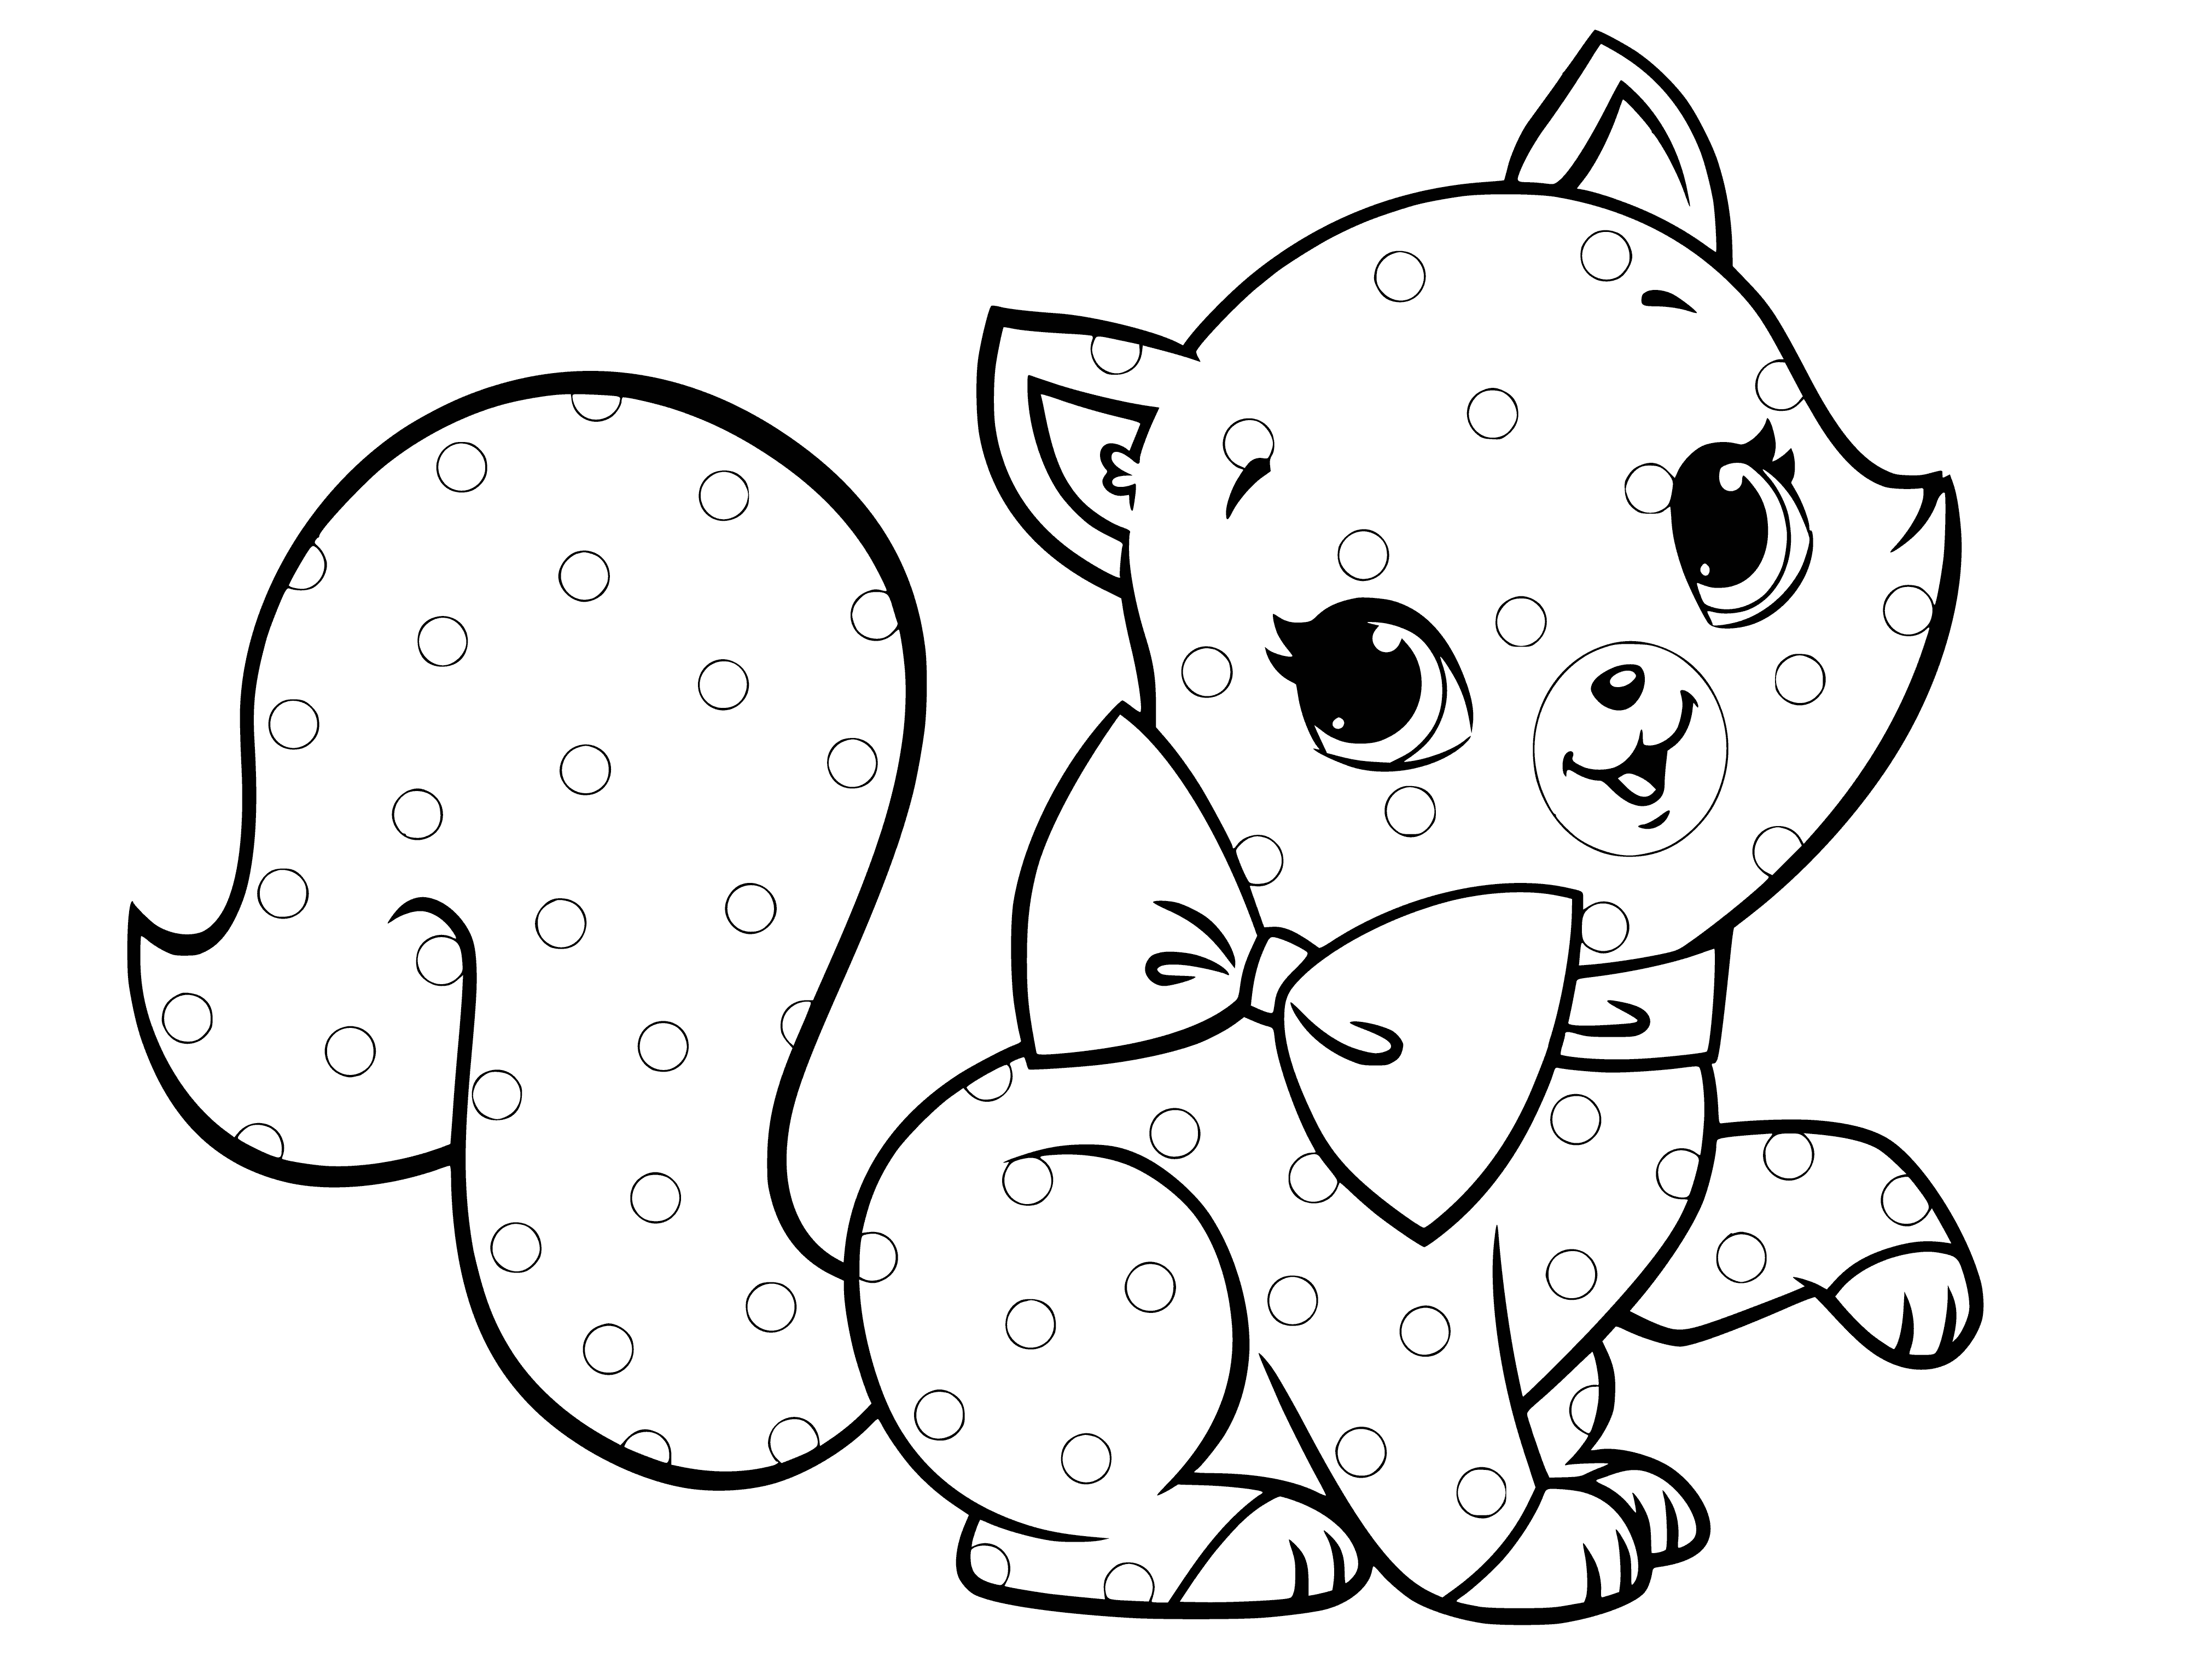 Cute yellow kitten with blue eyes and pink bow, sitting on its hind legs with outstretched paws. #coloringpage